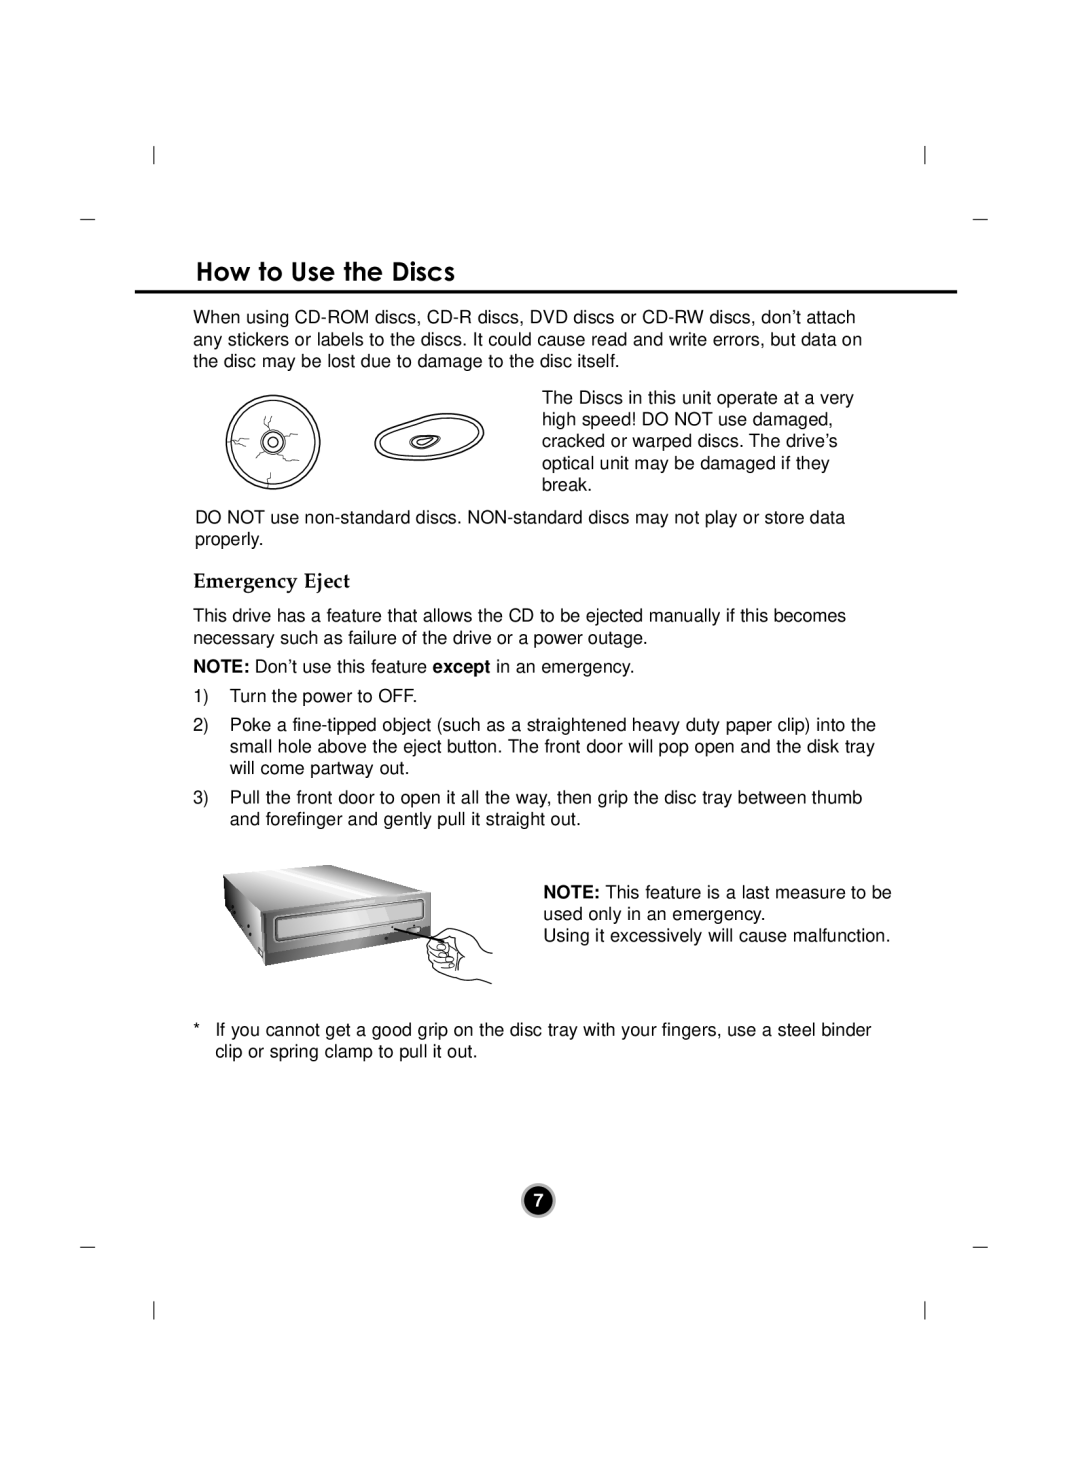 LG Electronics GH22 manual How to Use the Discs, Emergency Eject 